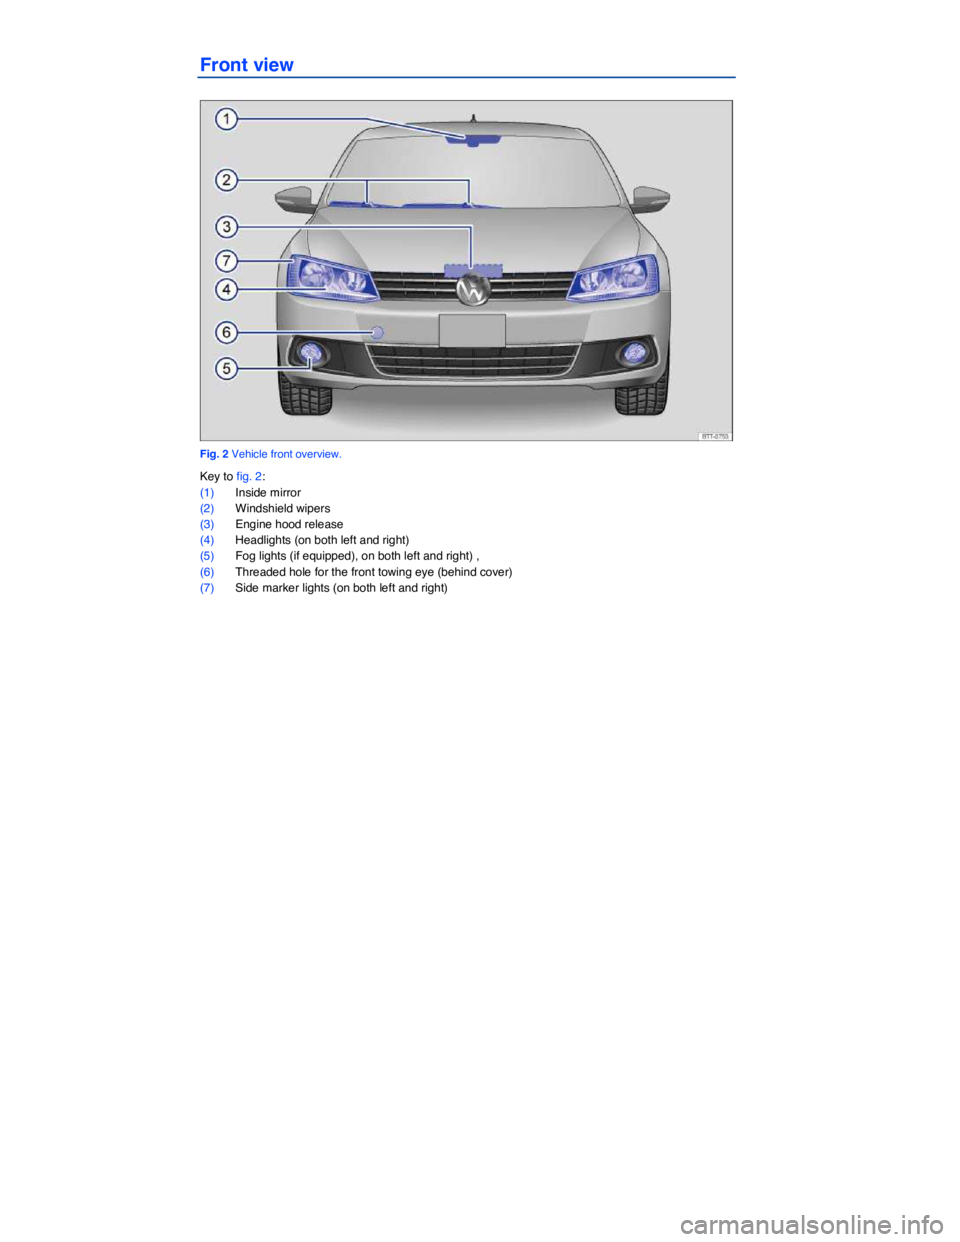 VOLKSWAGEN JETTA 2013  Owners Manual  
Front view 
 
Fig. 2 Vehicle front overview. 
Key to fig. 2: 
(1) Inside mirror  
(2) Windshield wipers  
(3) Engine hood release  
(4) Headlights (on both left and right)  
(5) Fog lights (if equip